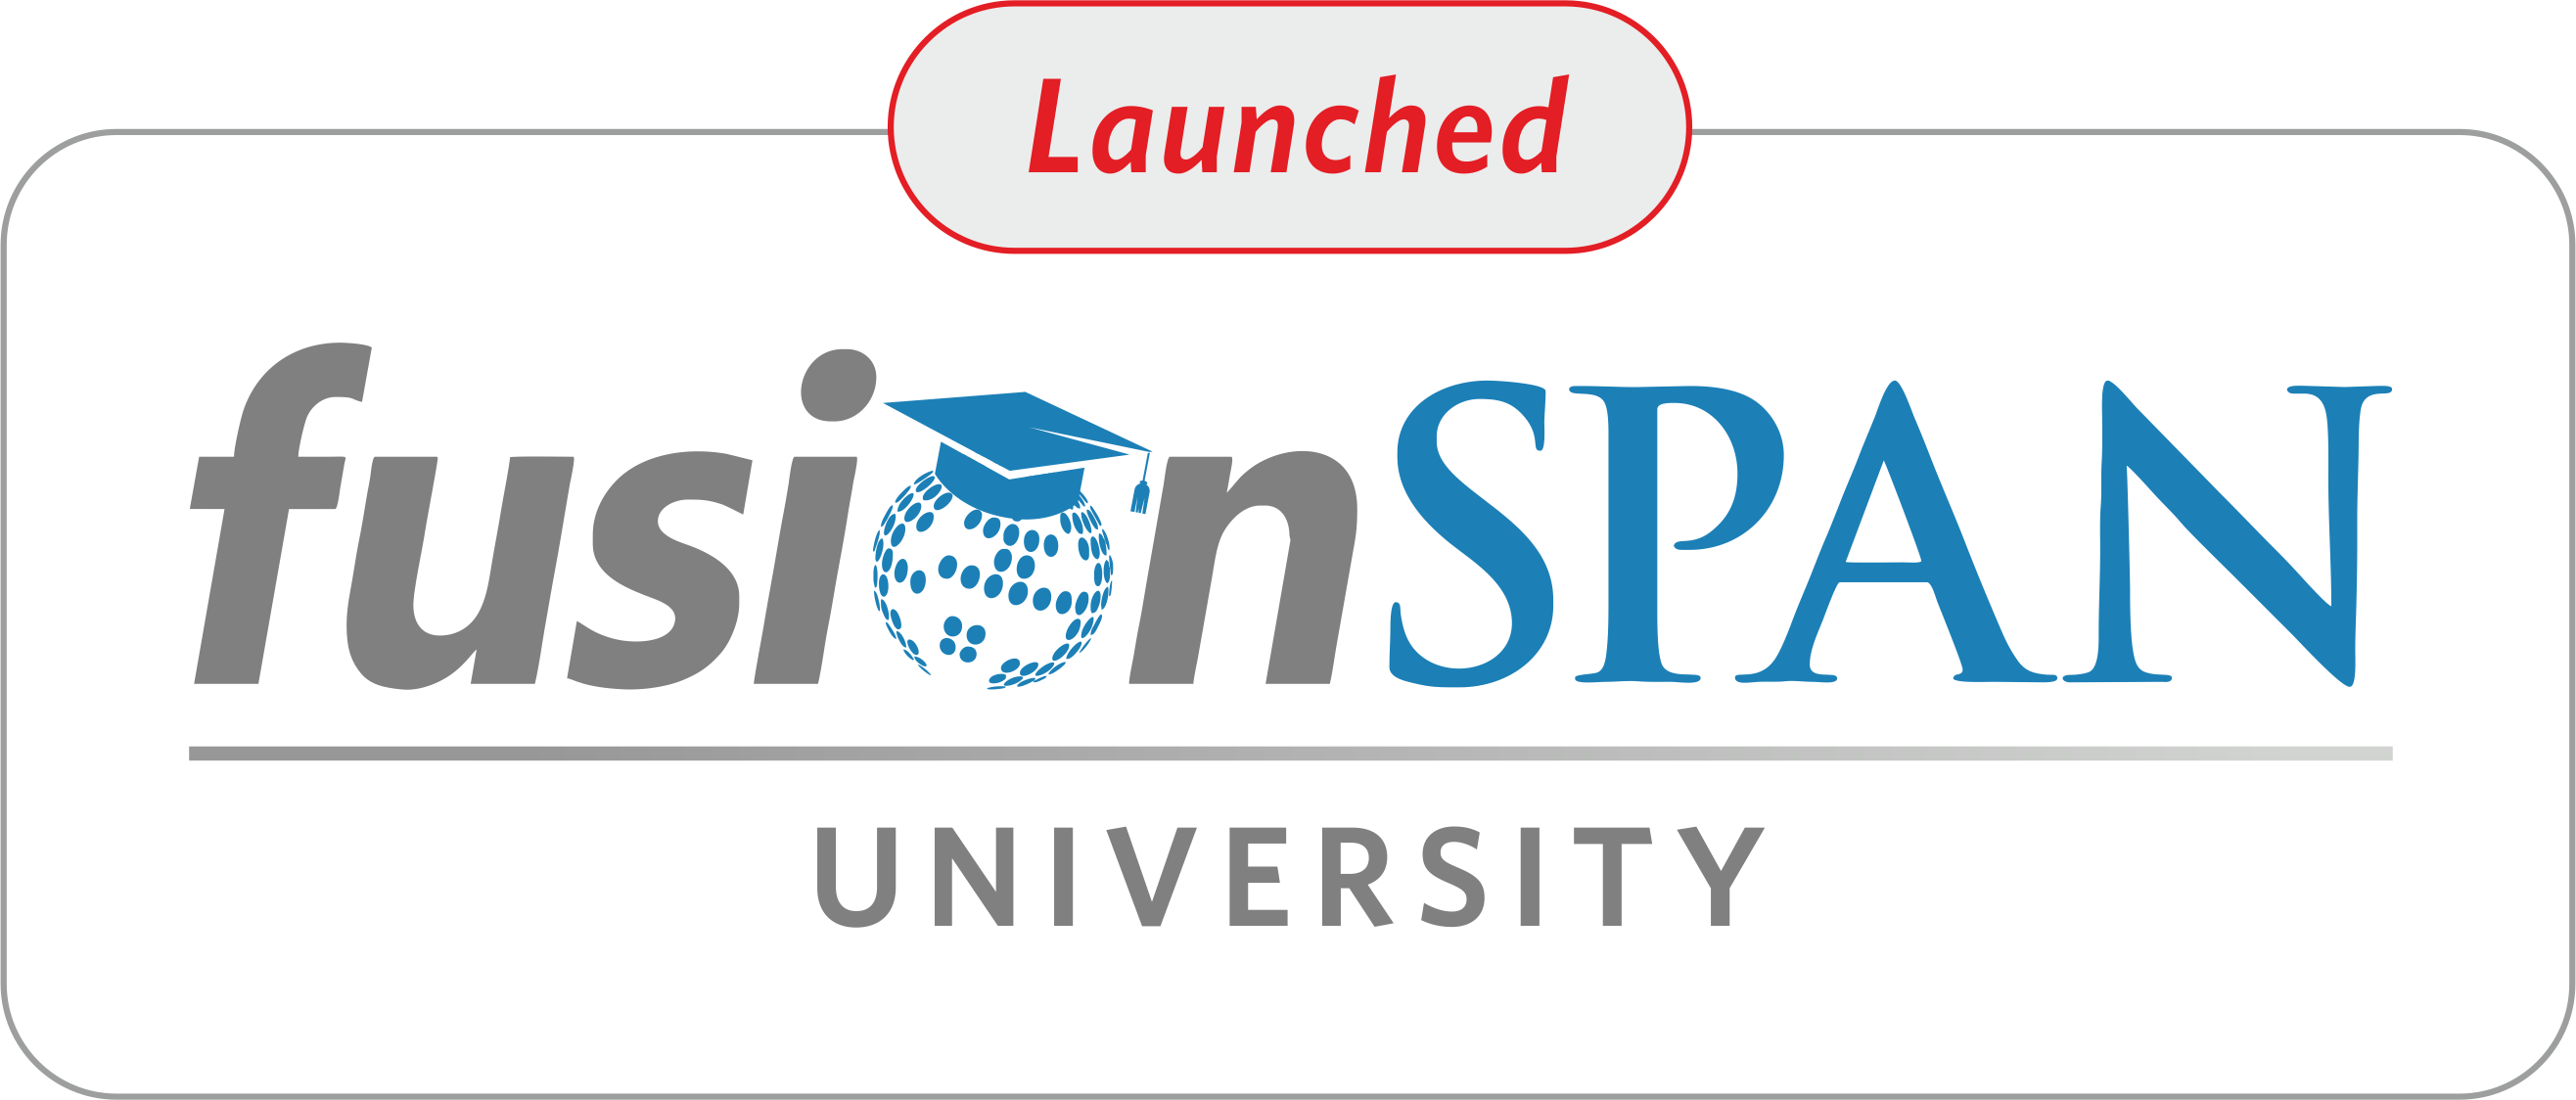 FS University - Launched